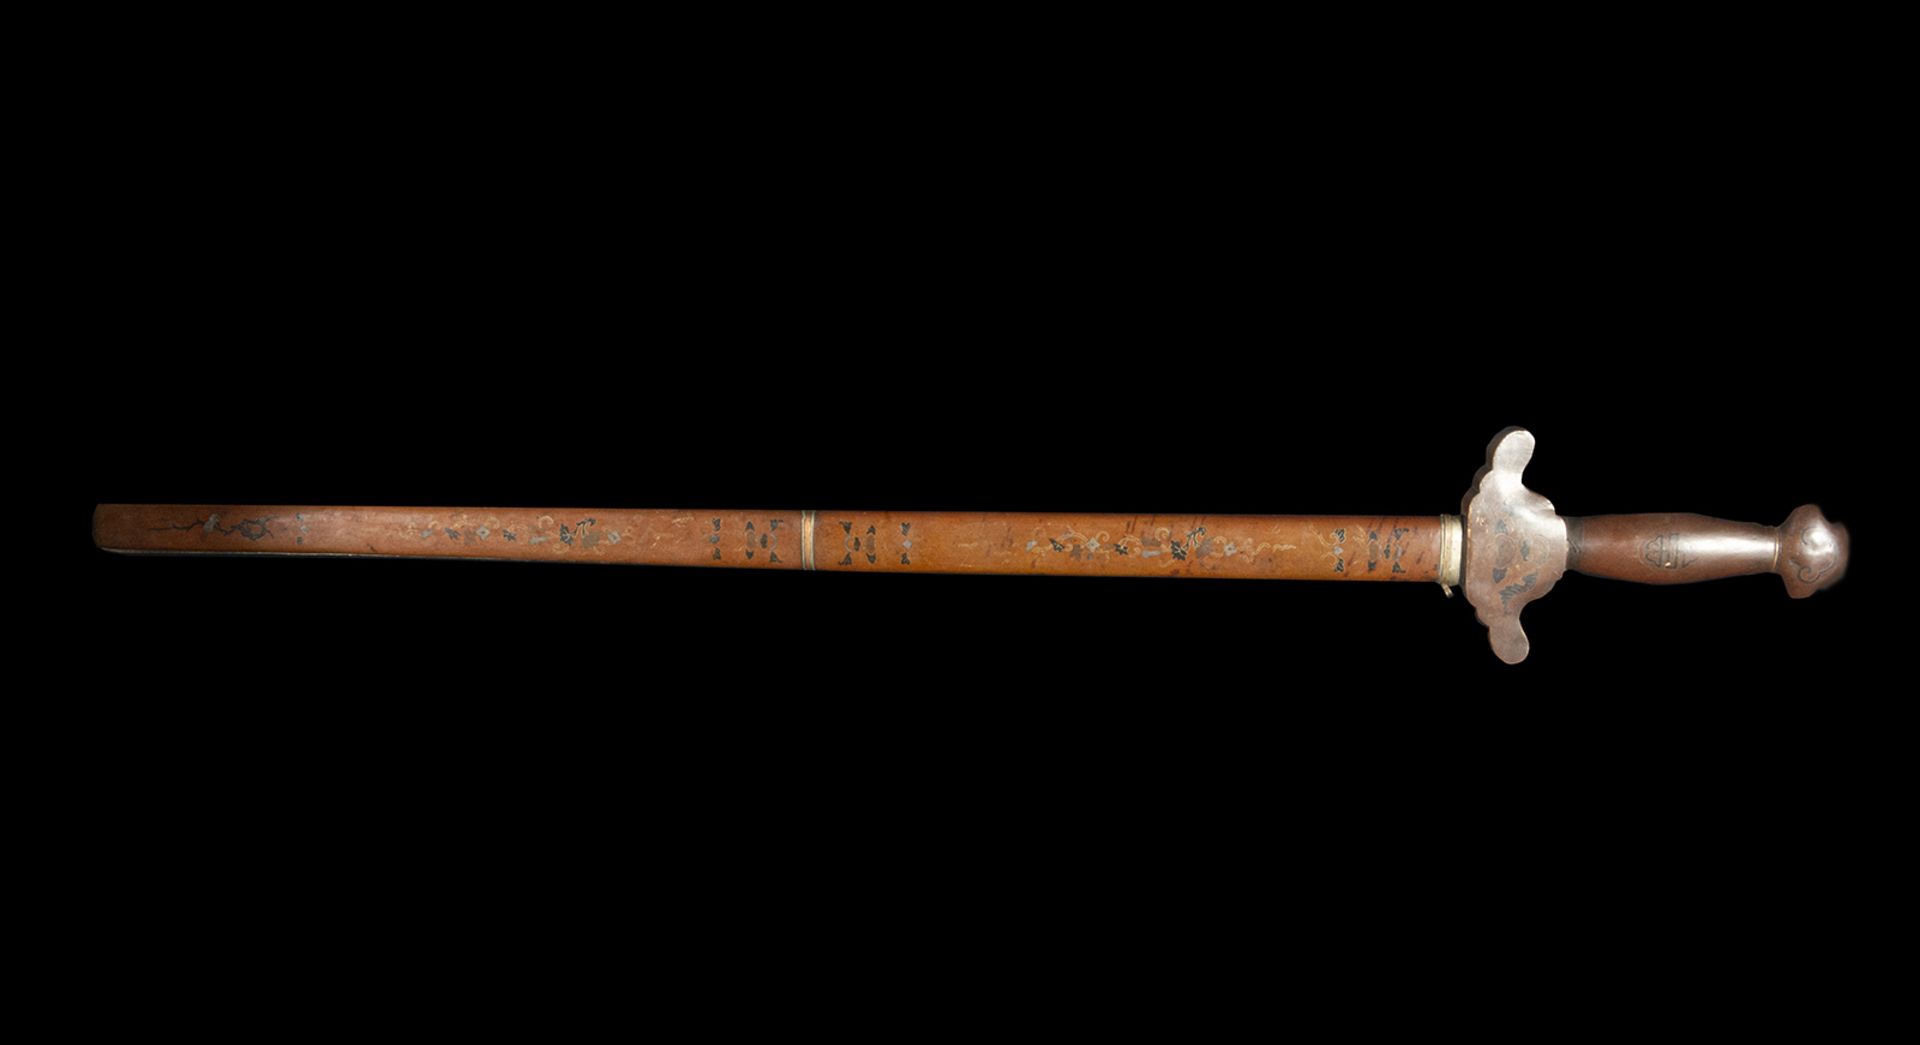 Chinese Imperial Guard sword in steel with copper sheath decorated with gold and silver thread, Qing